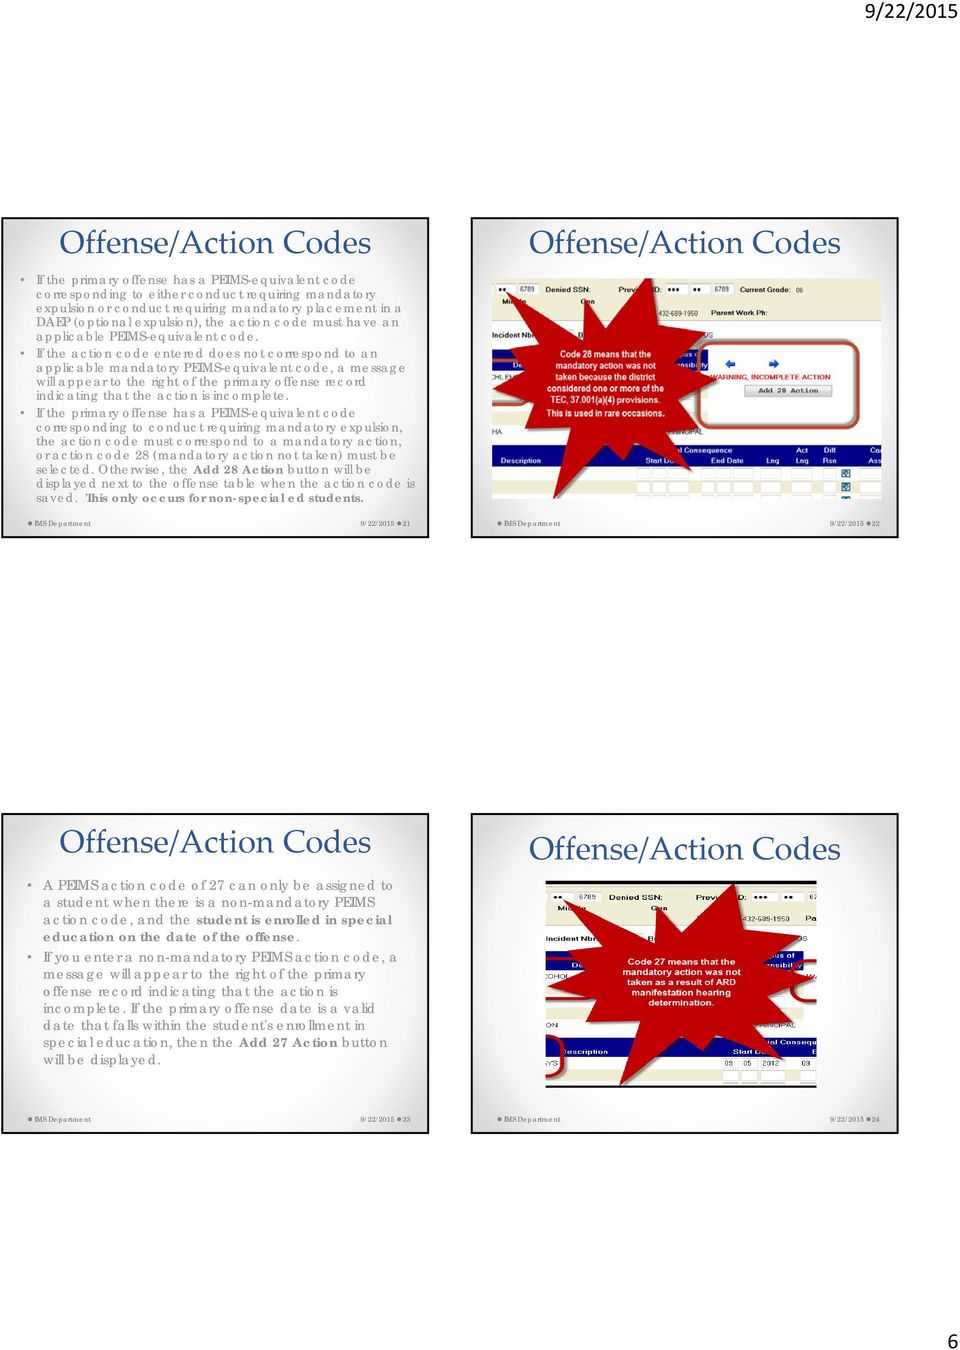 If the action code entered does not correspond to an applicable mandatory PEIMS-equivalent code, a message will appear to the right of the primary offense record indicating that the action is